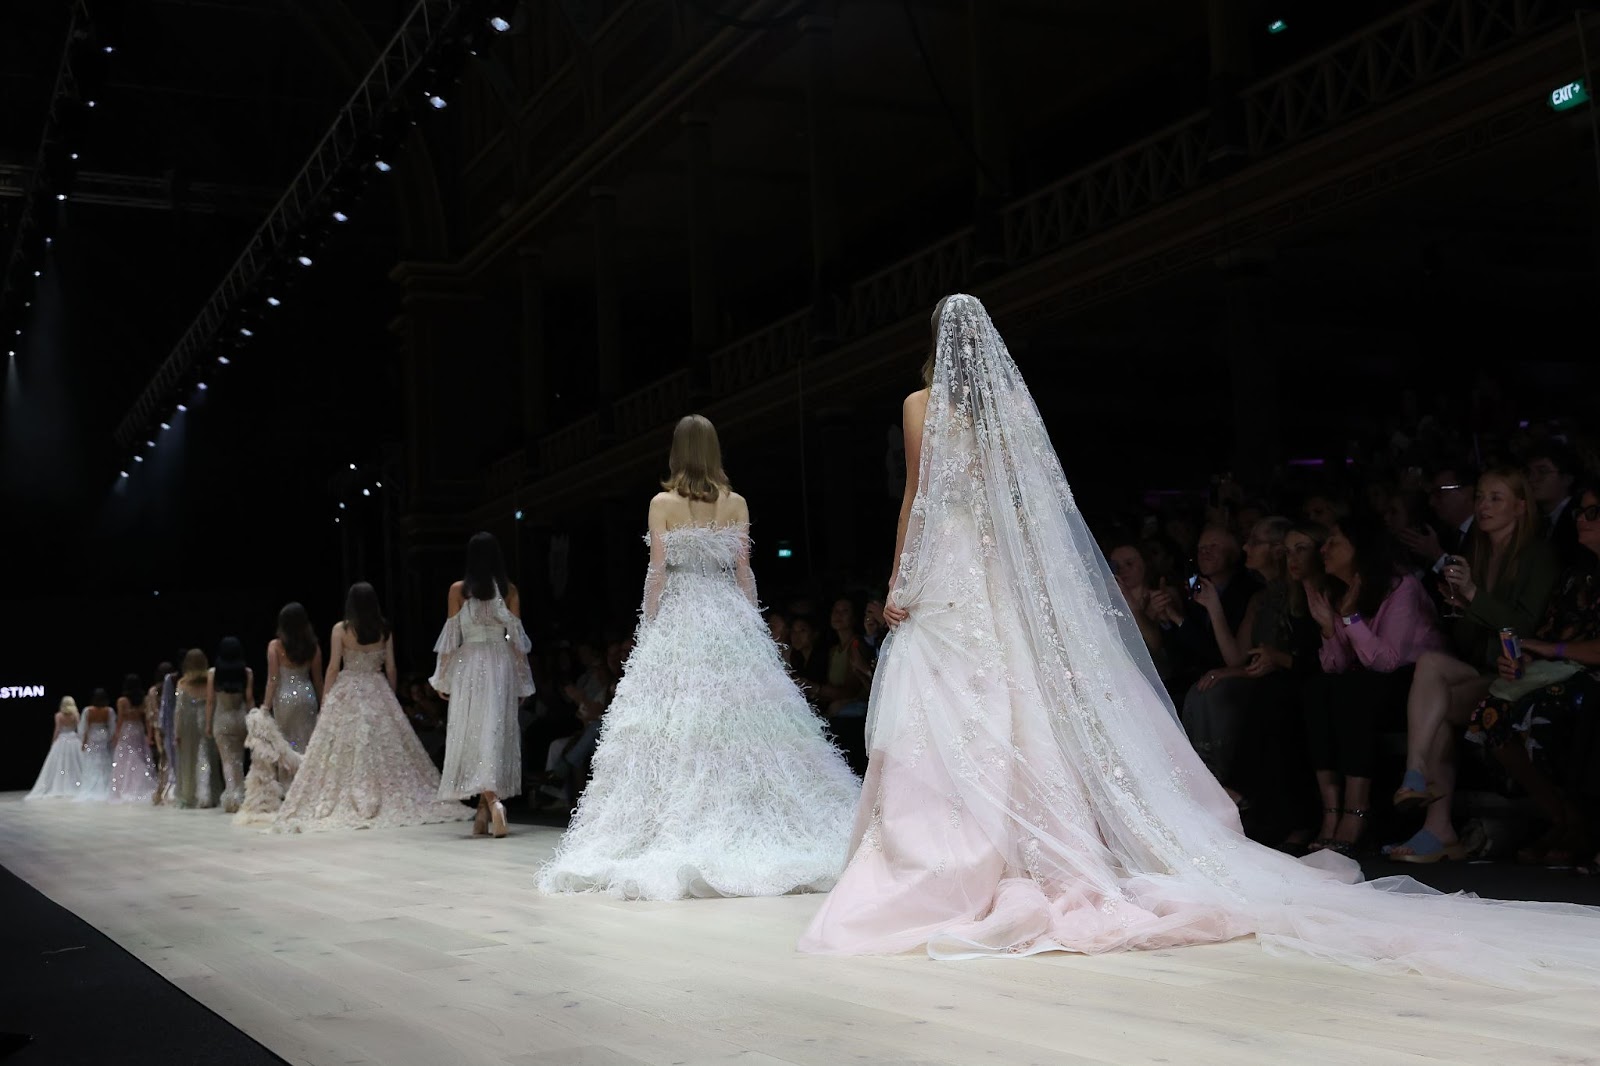 Beautifully embroidered veil in Paolo Sebastian's solo runway.